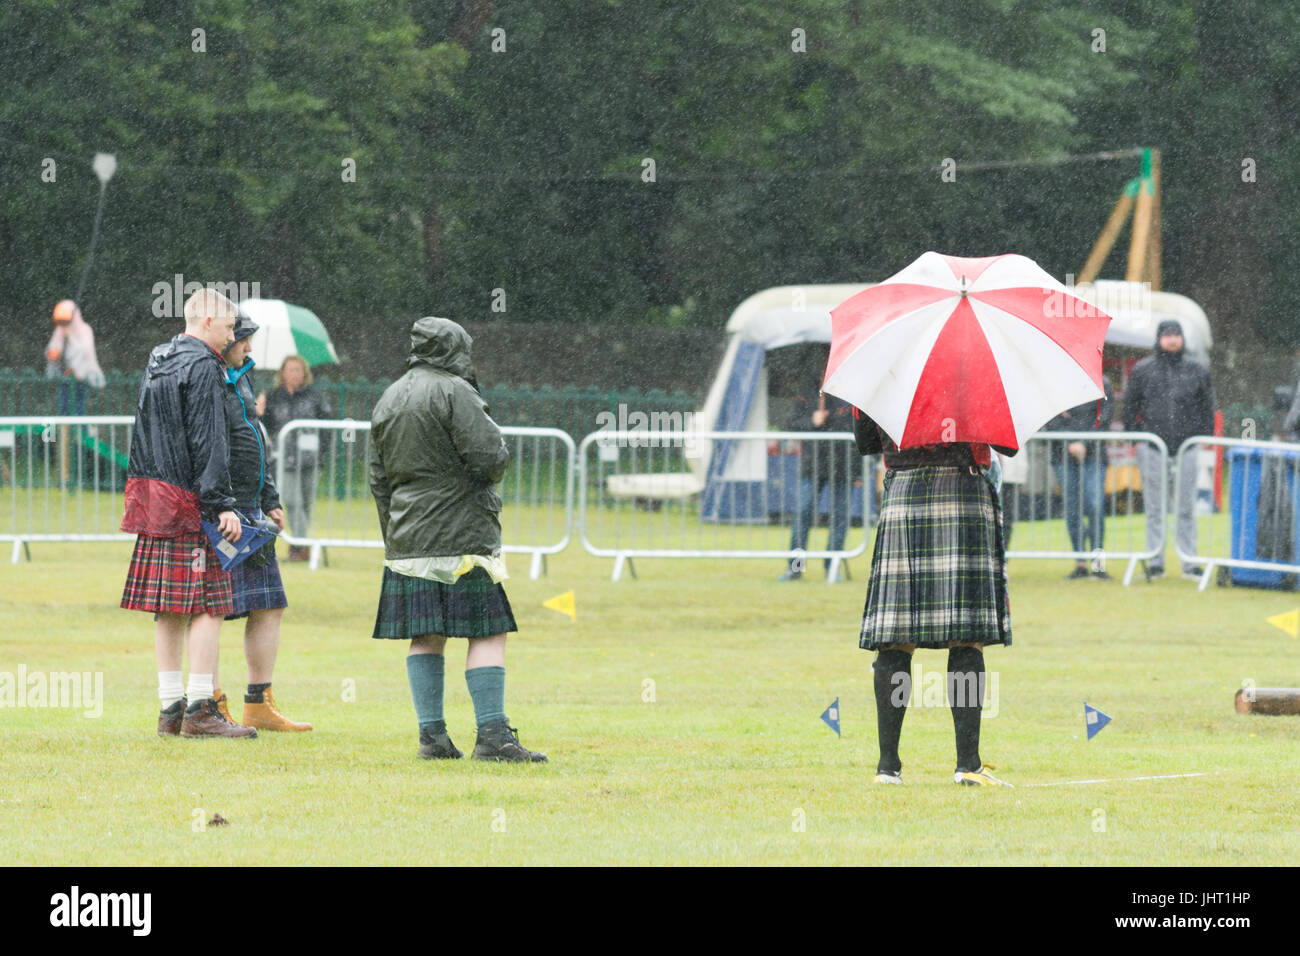 Balloch, Loch Lomond, Scotland, UK. 15th July, 2017. UK weather - competitors faced very wet conditions at the Loch Lomond Highland Games. The Loch Lomond Games annual event is now in its 51st year and includes the Scottish Highland Games Association Official World Heavyweight Championship as well as local sporting competitions. Credit: Kay Roxby/Alamy Live News Stock Photo